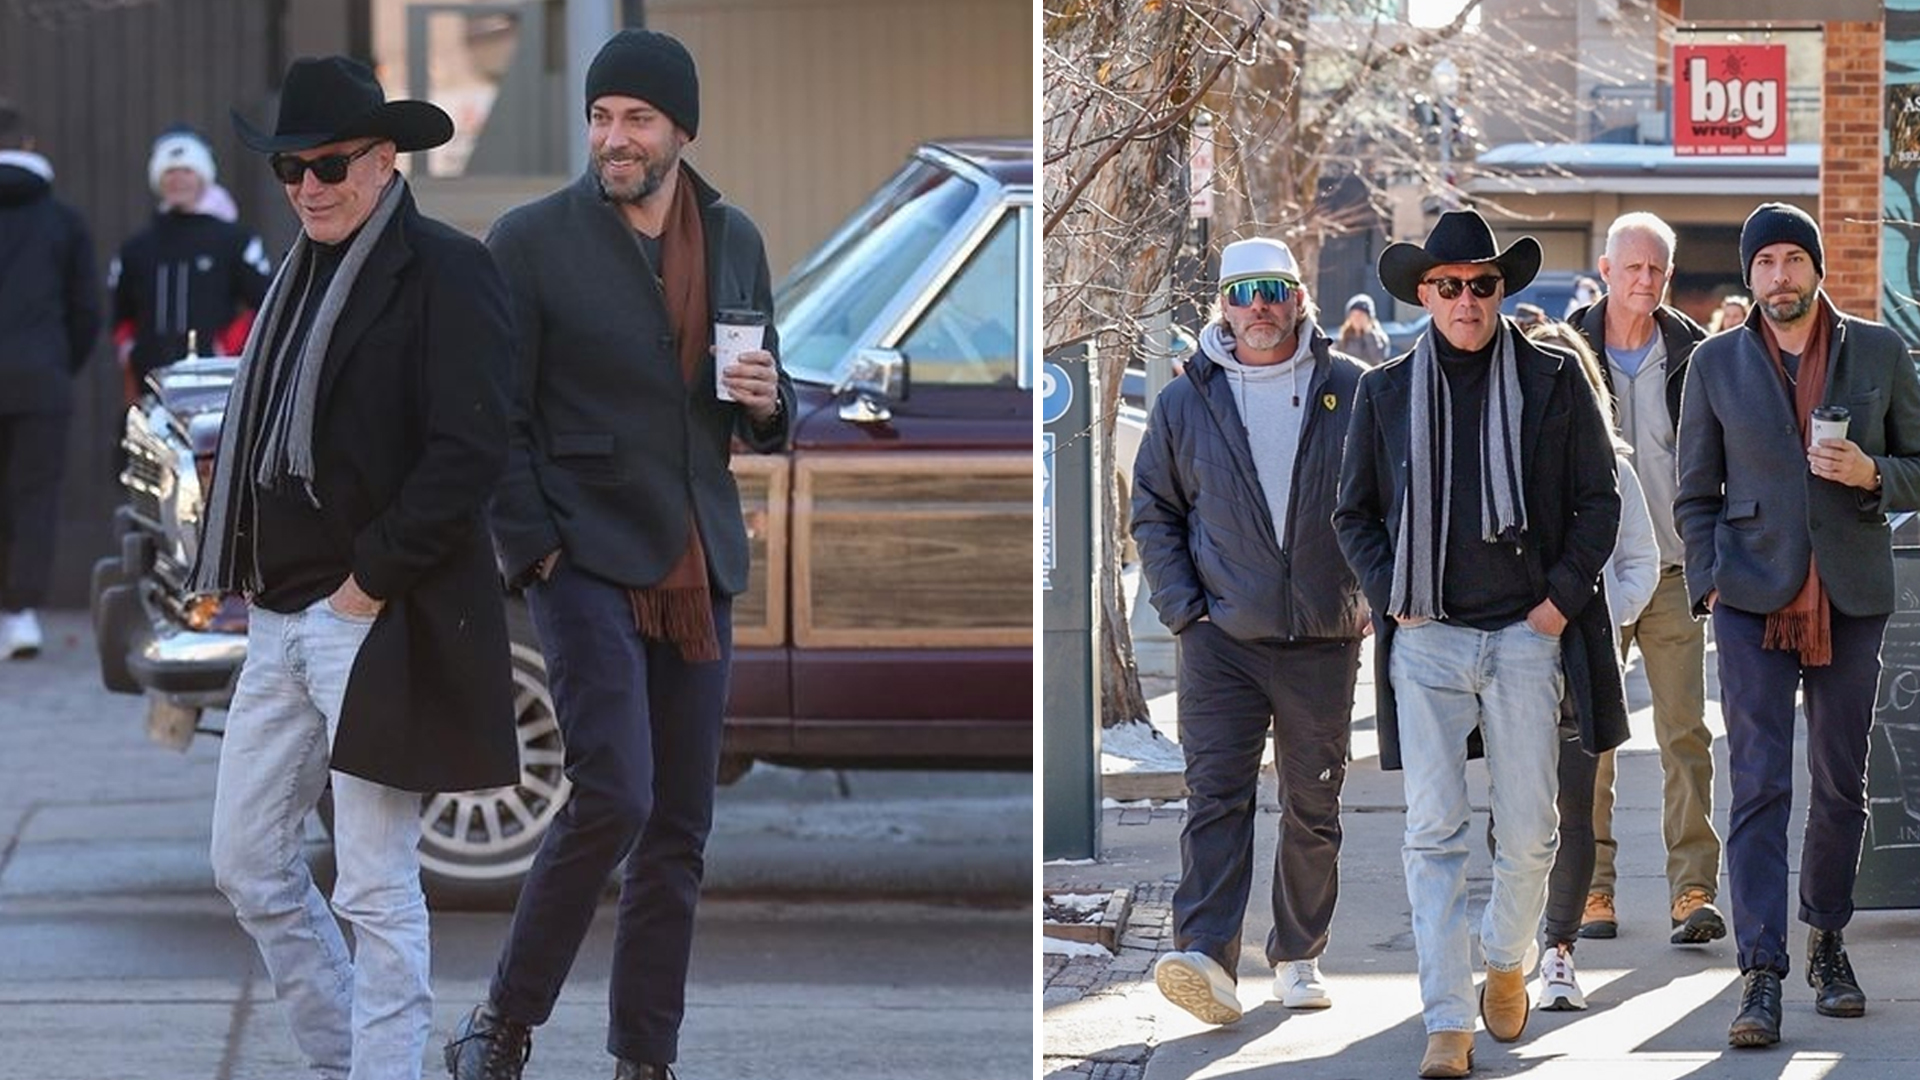 Kevin Costner and Zachary Levi Together in Aspen!